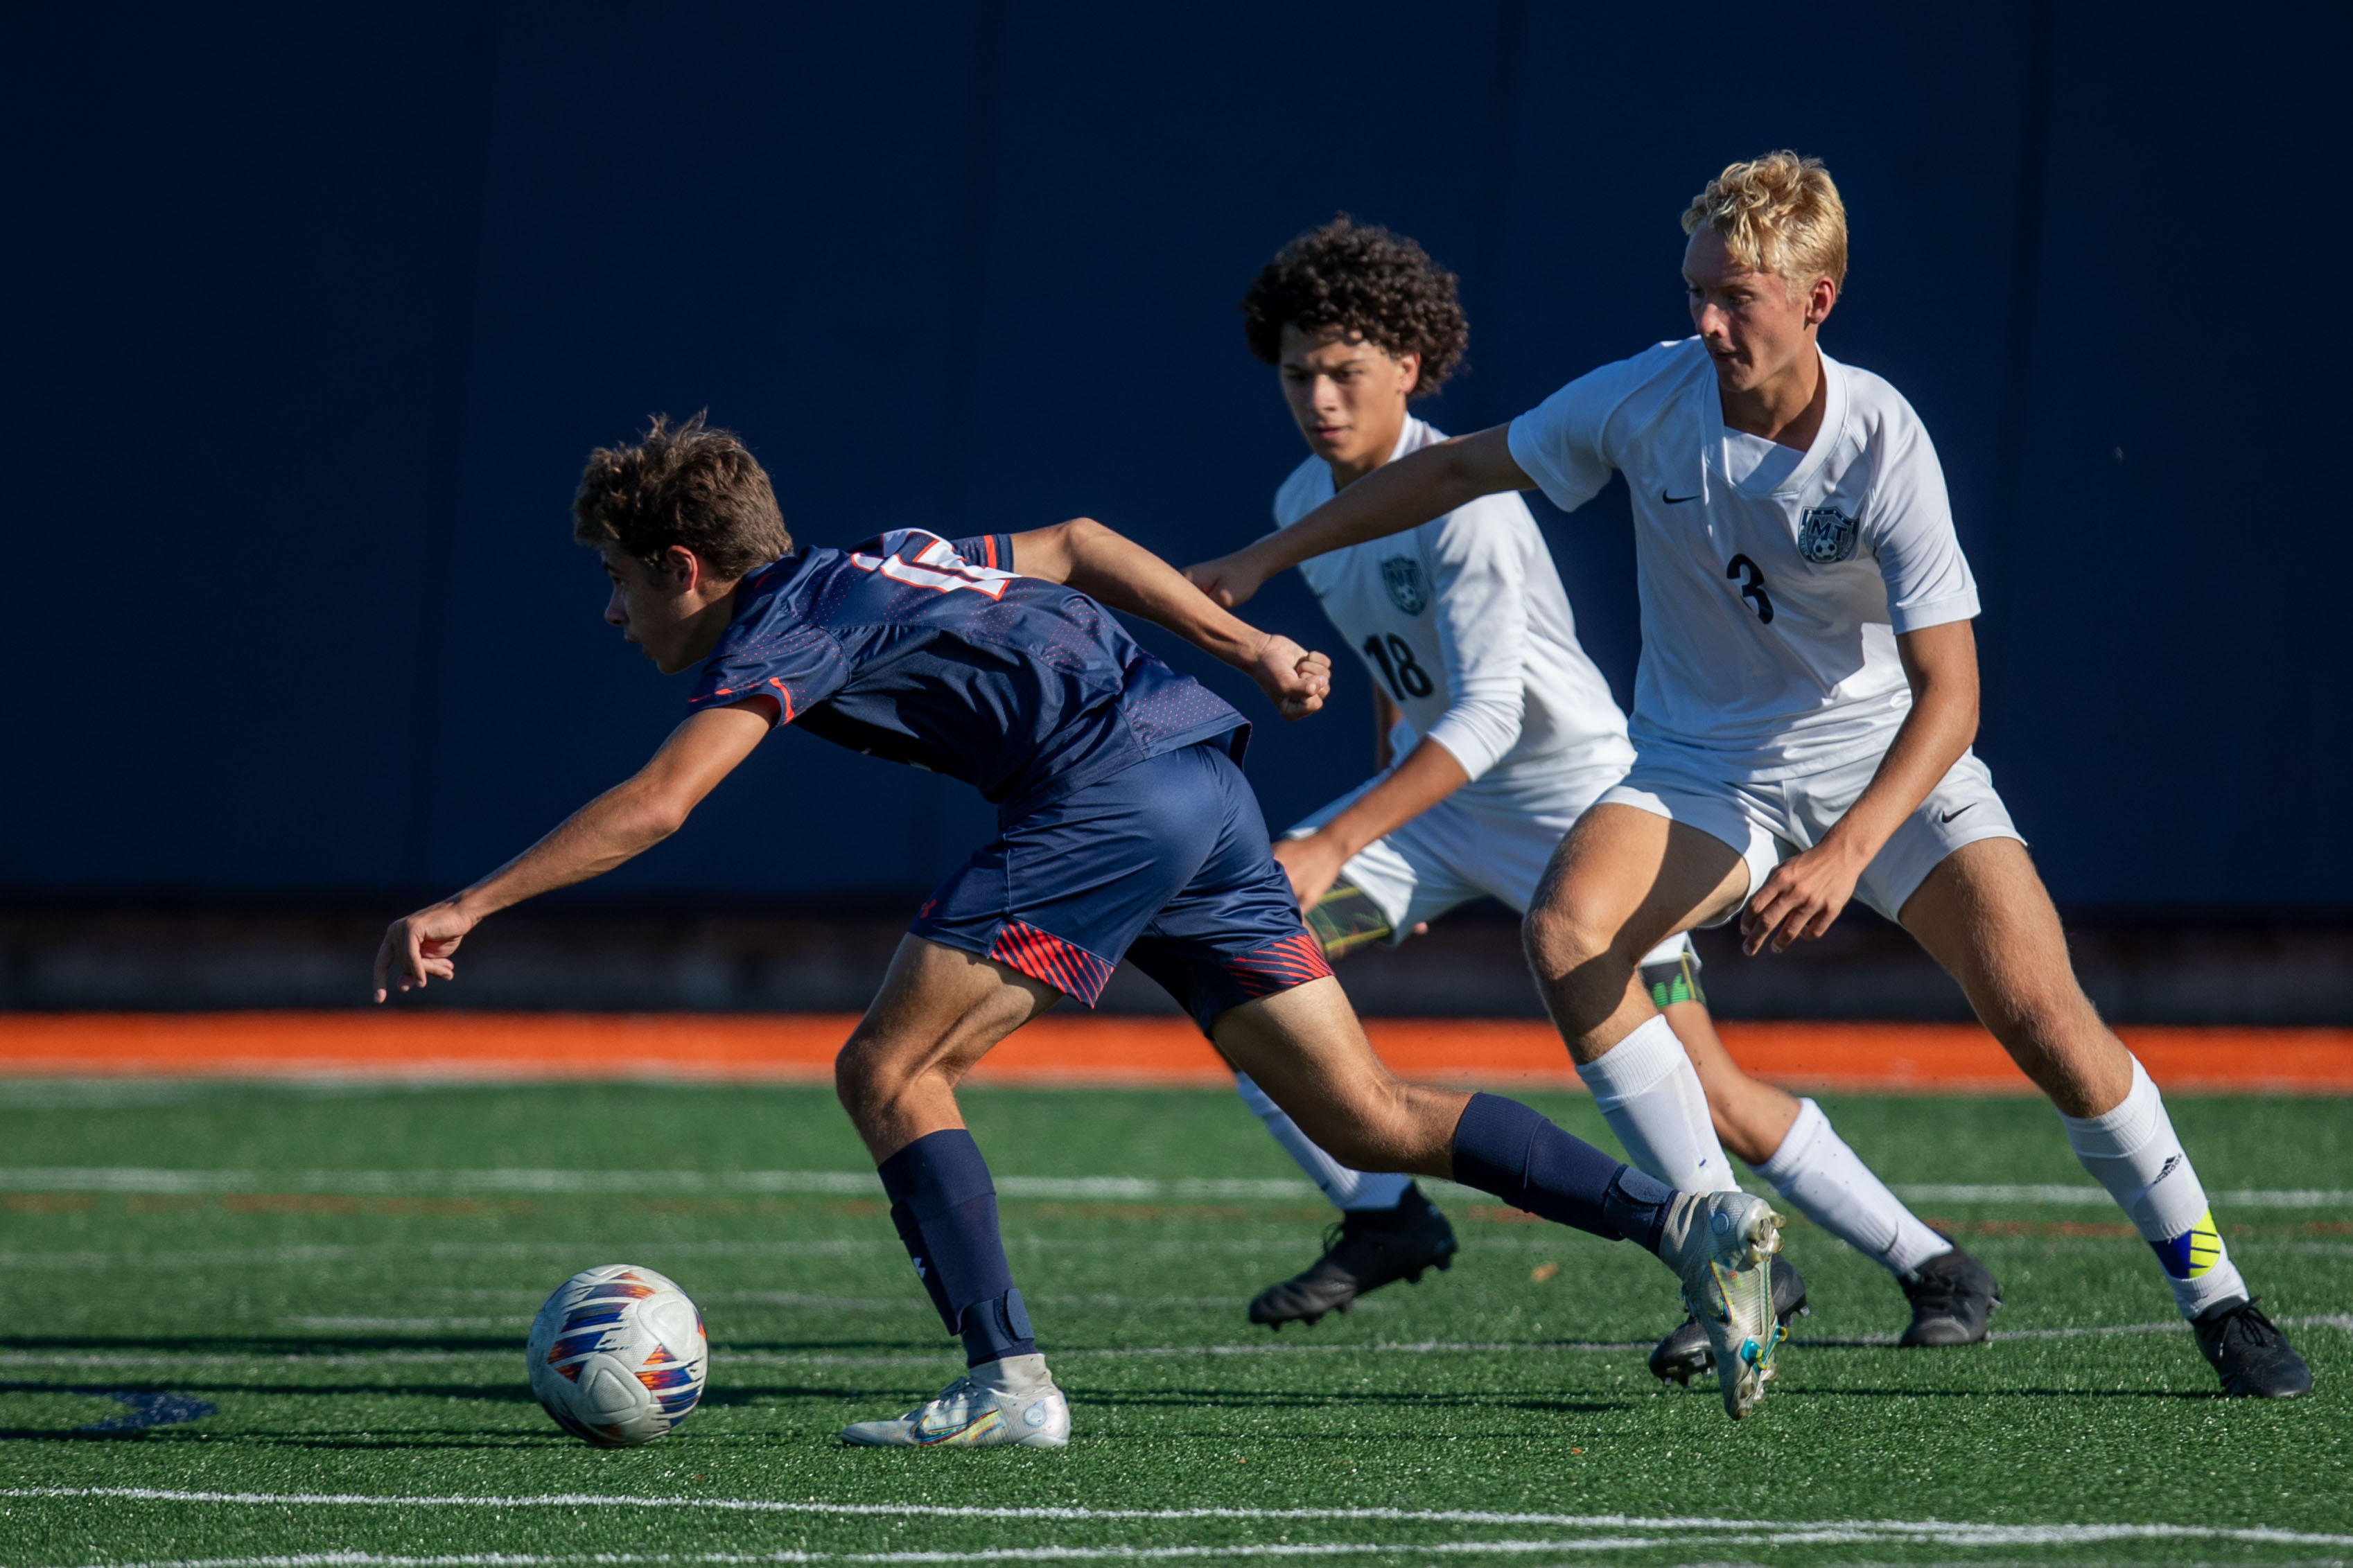 Hershey and Manheim Township play to a 0-0 tie in regulation - pennlive.com